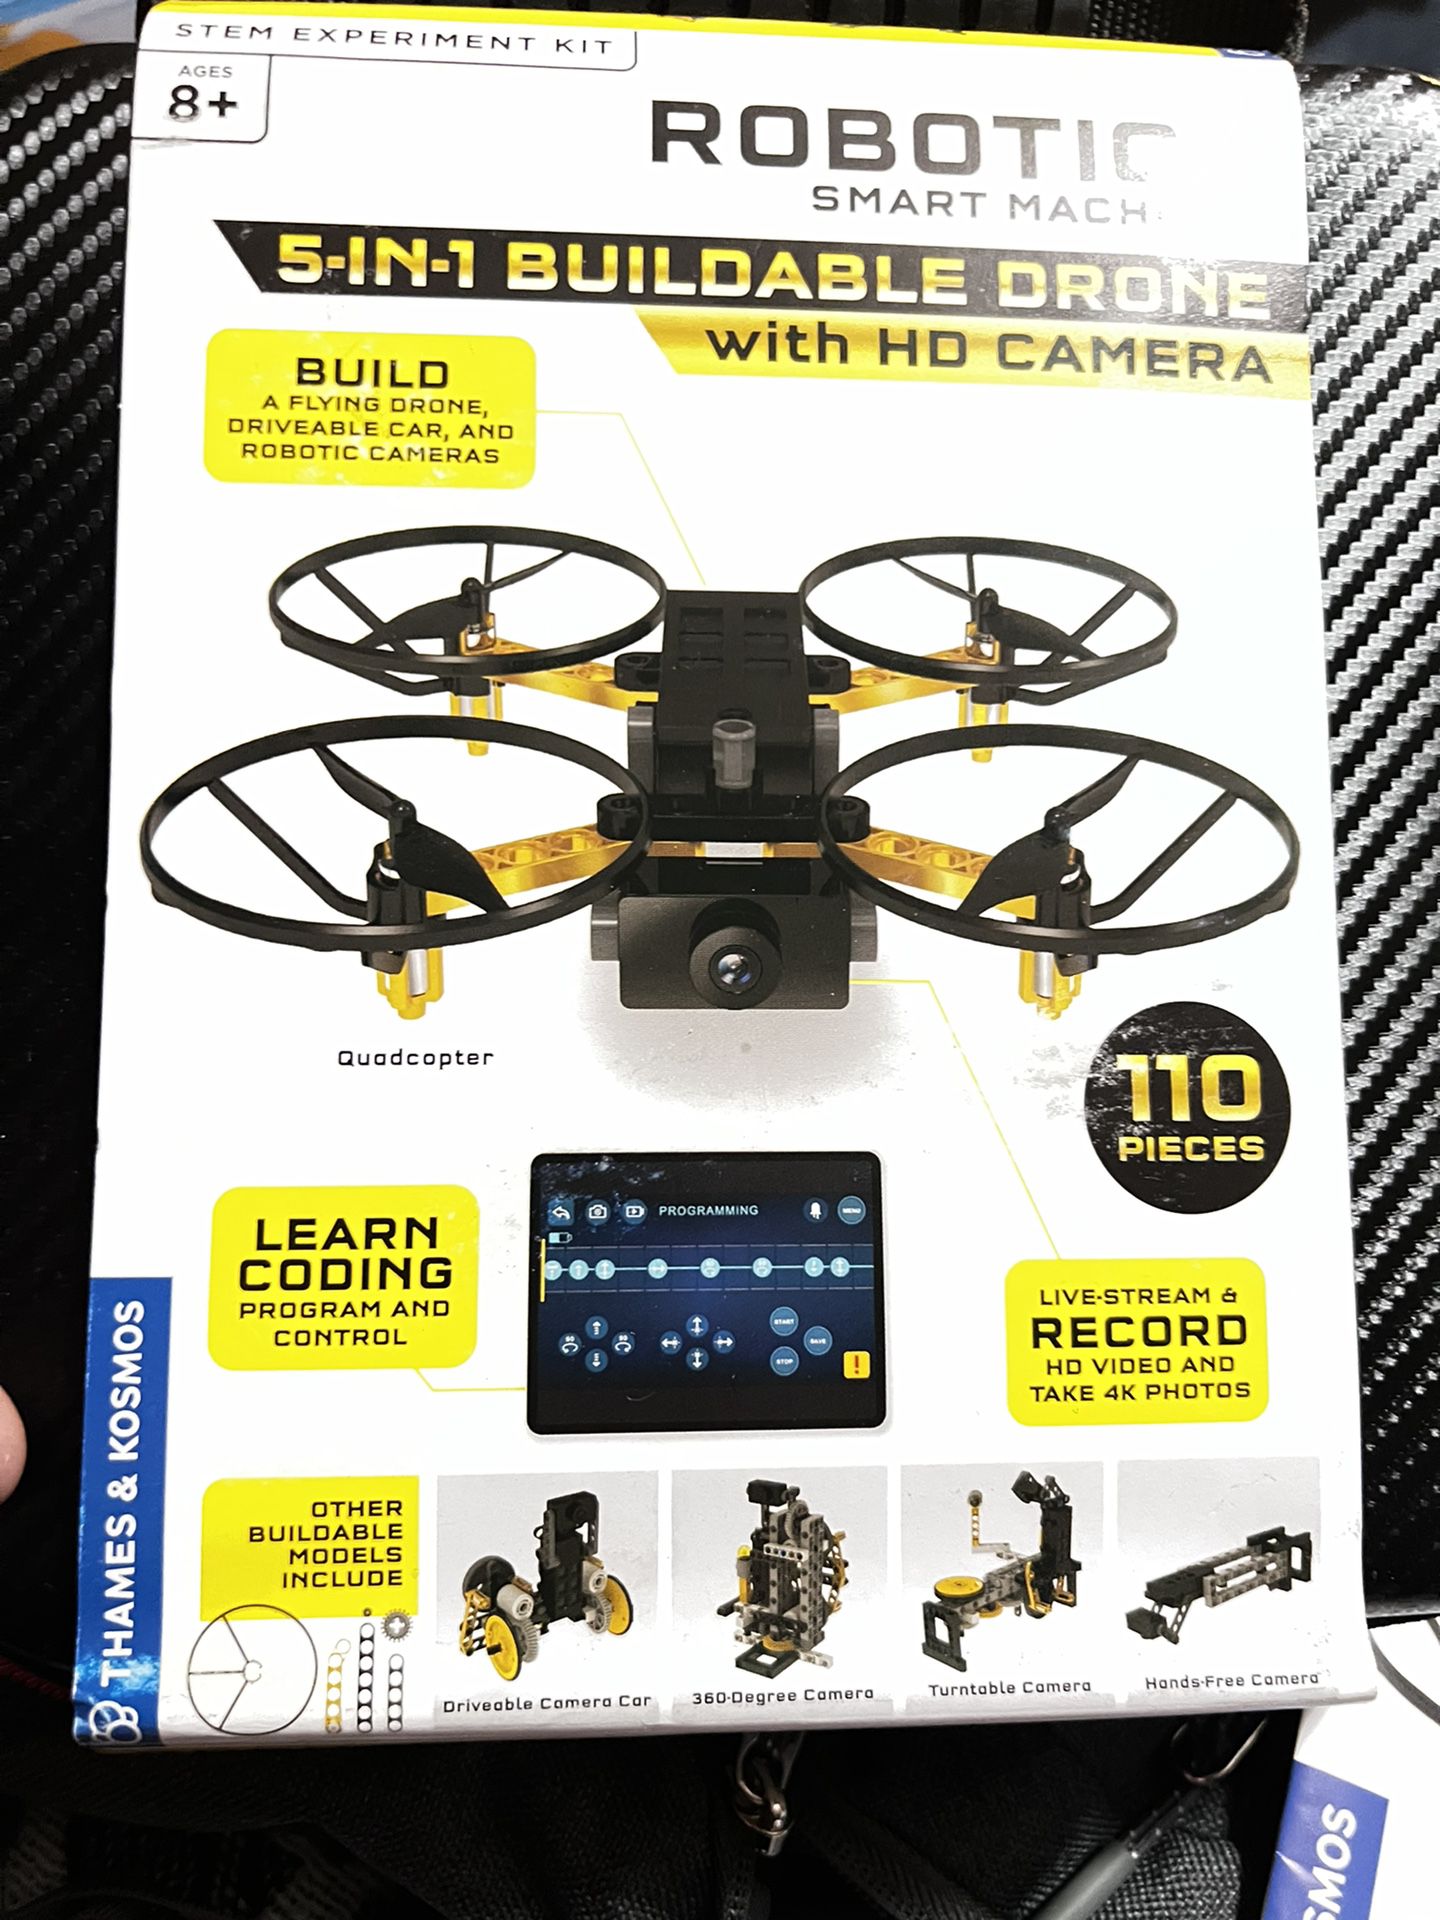 Drone With HD Camera 5-in-1